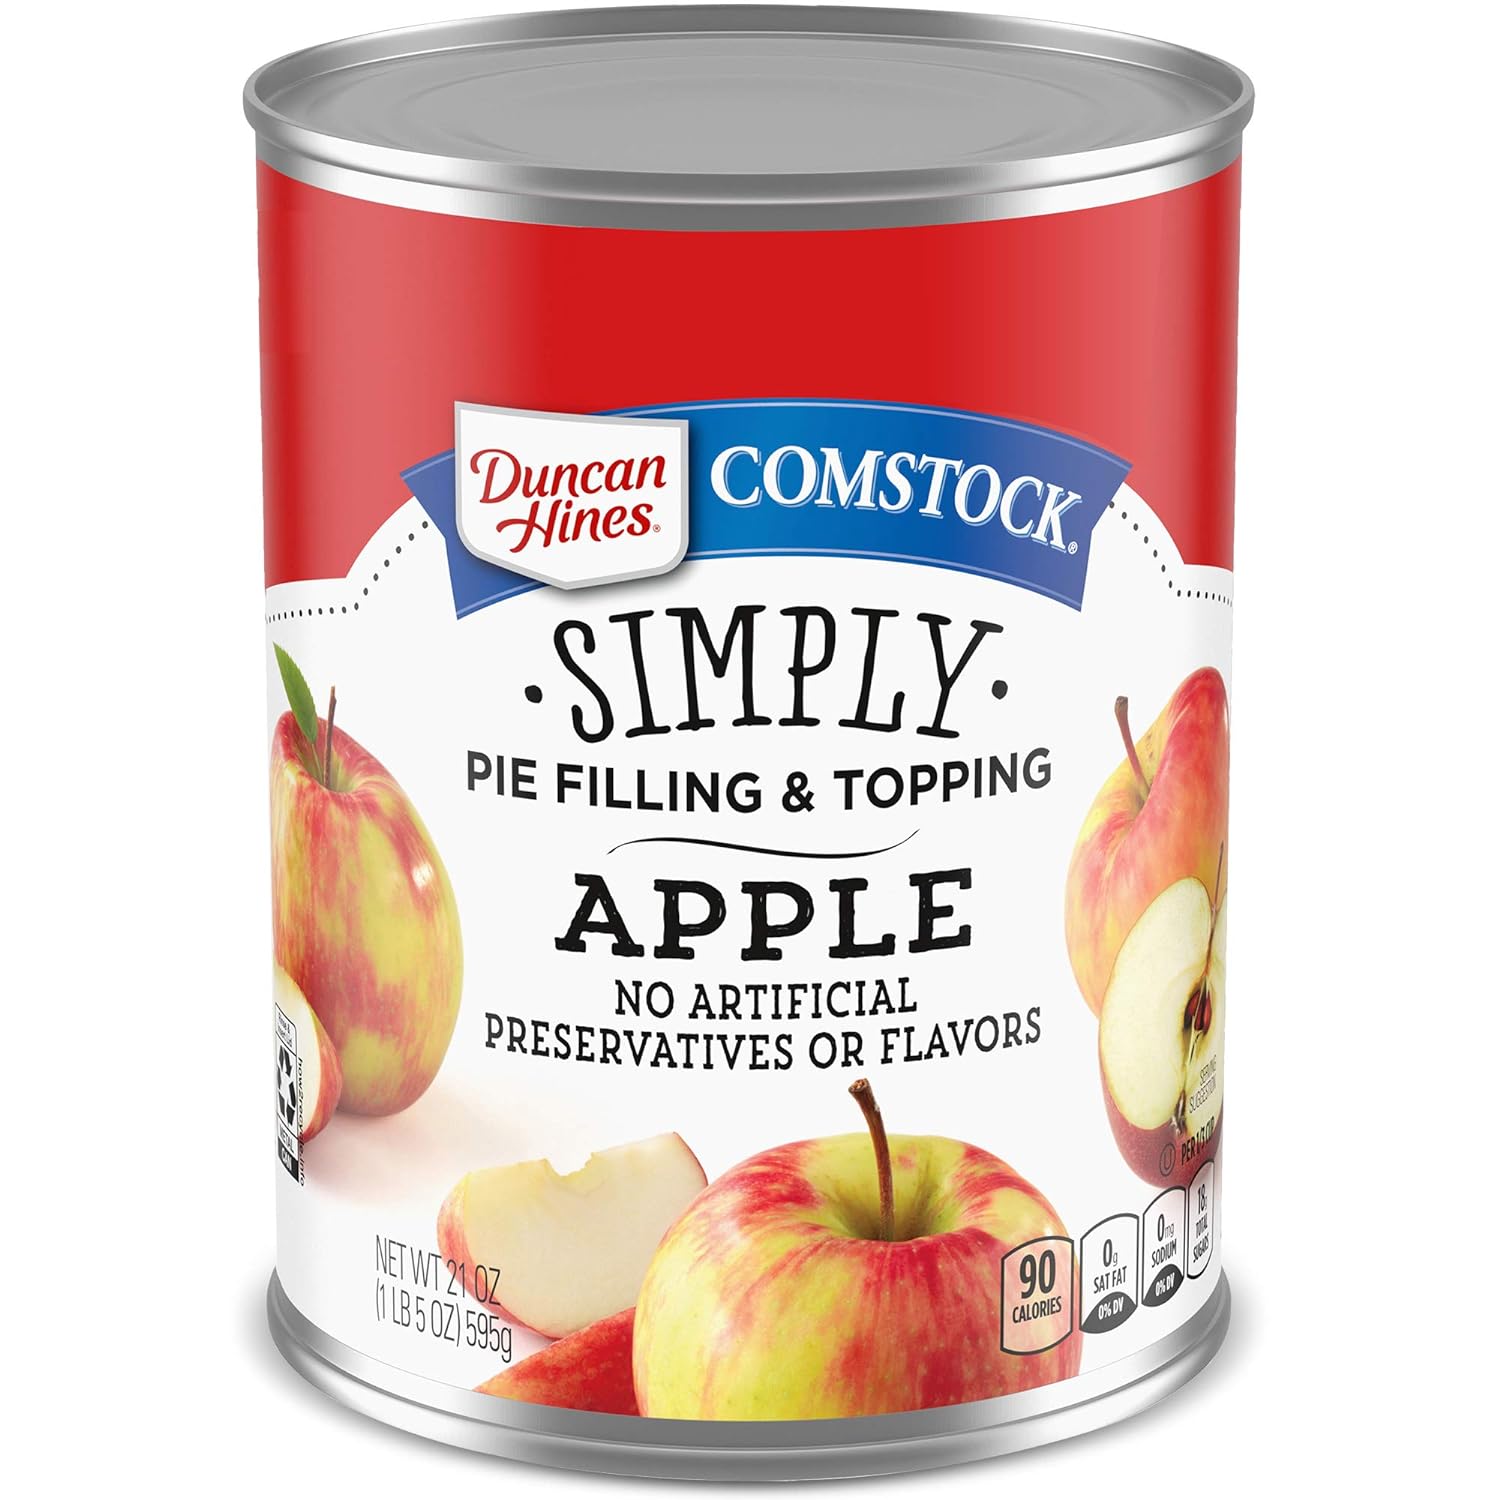 Duncan Hines Comstock Simply Pie Filling, Apple, 21 Ounce (Pack of 8)